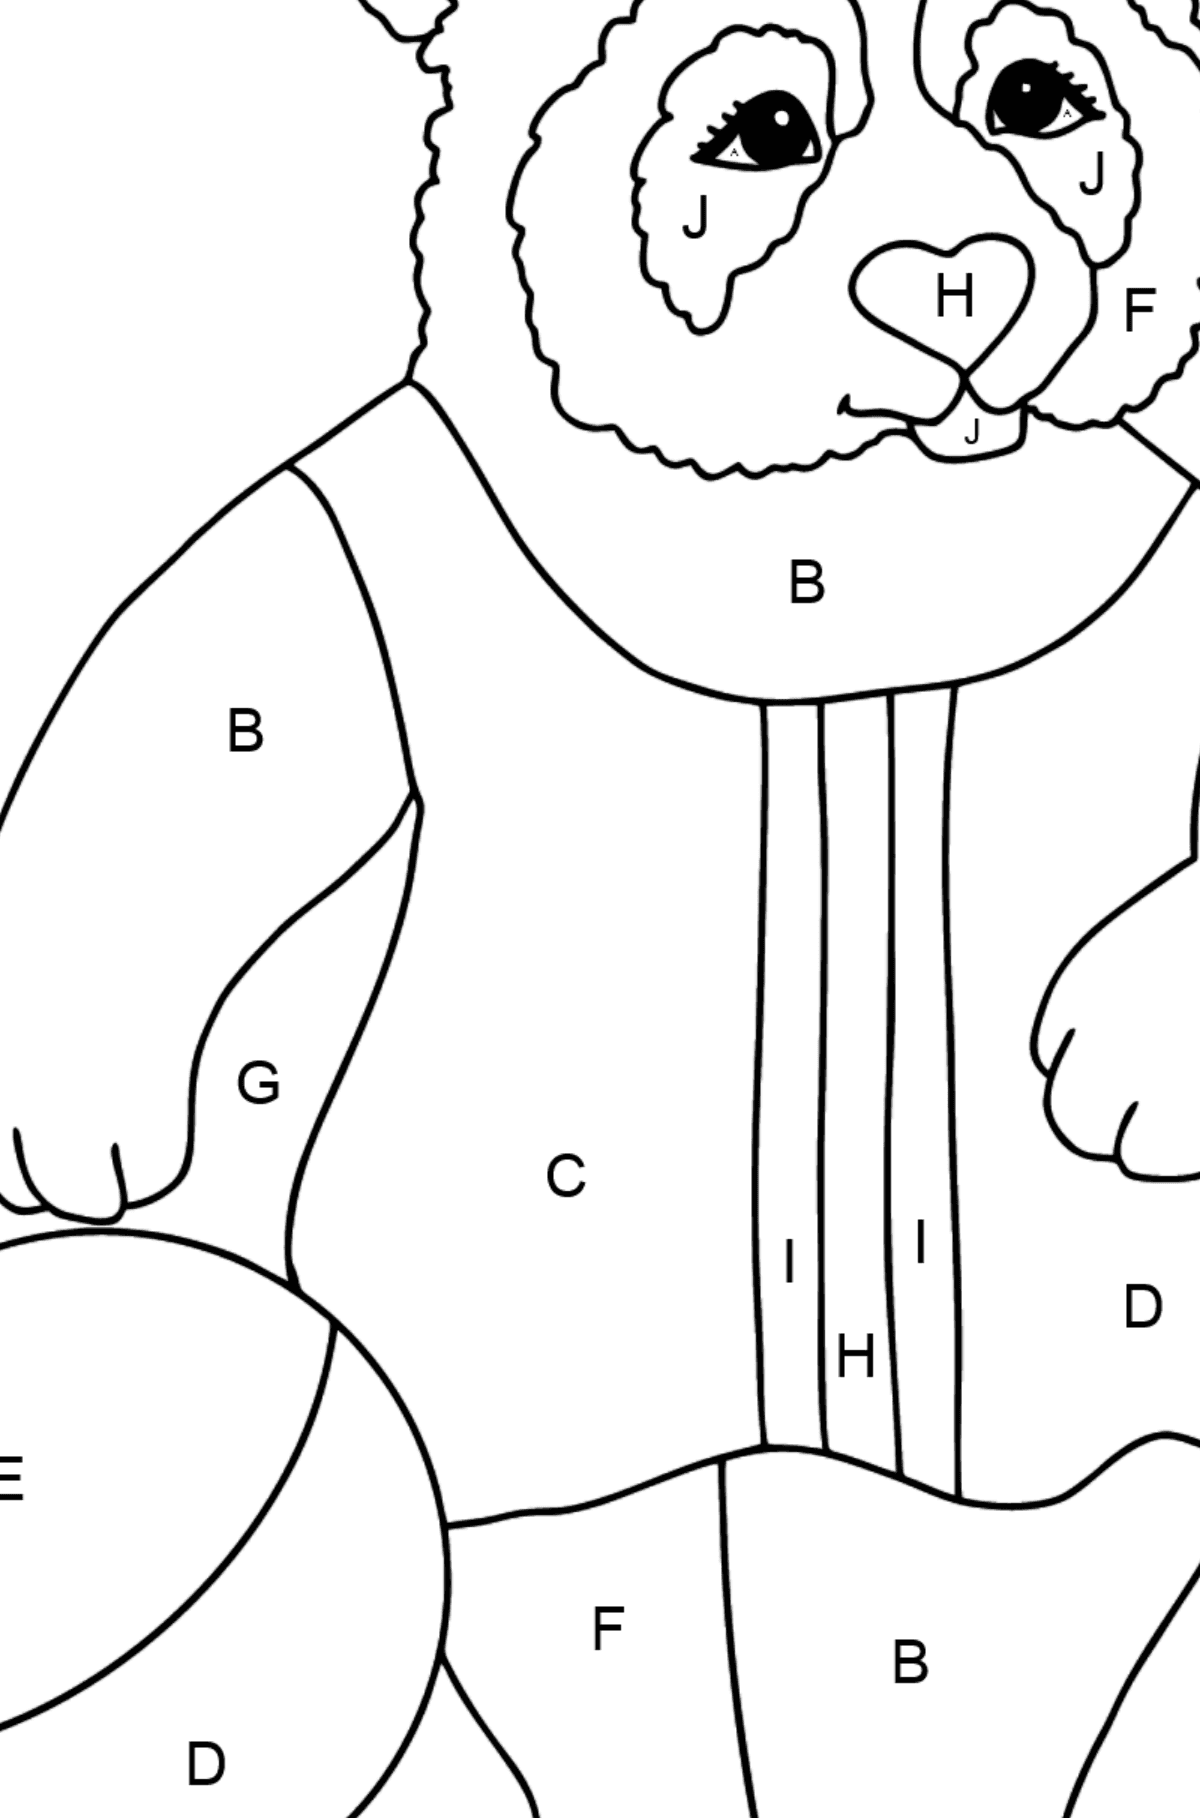 Coloring Picture - A Panda is Playing on a Beach - Coloring by Letters for Kids